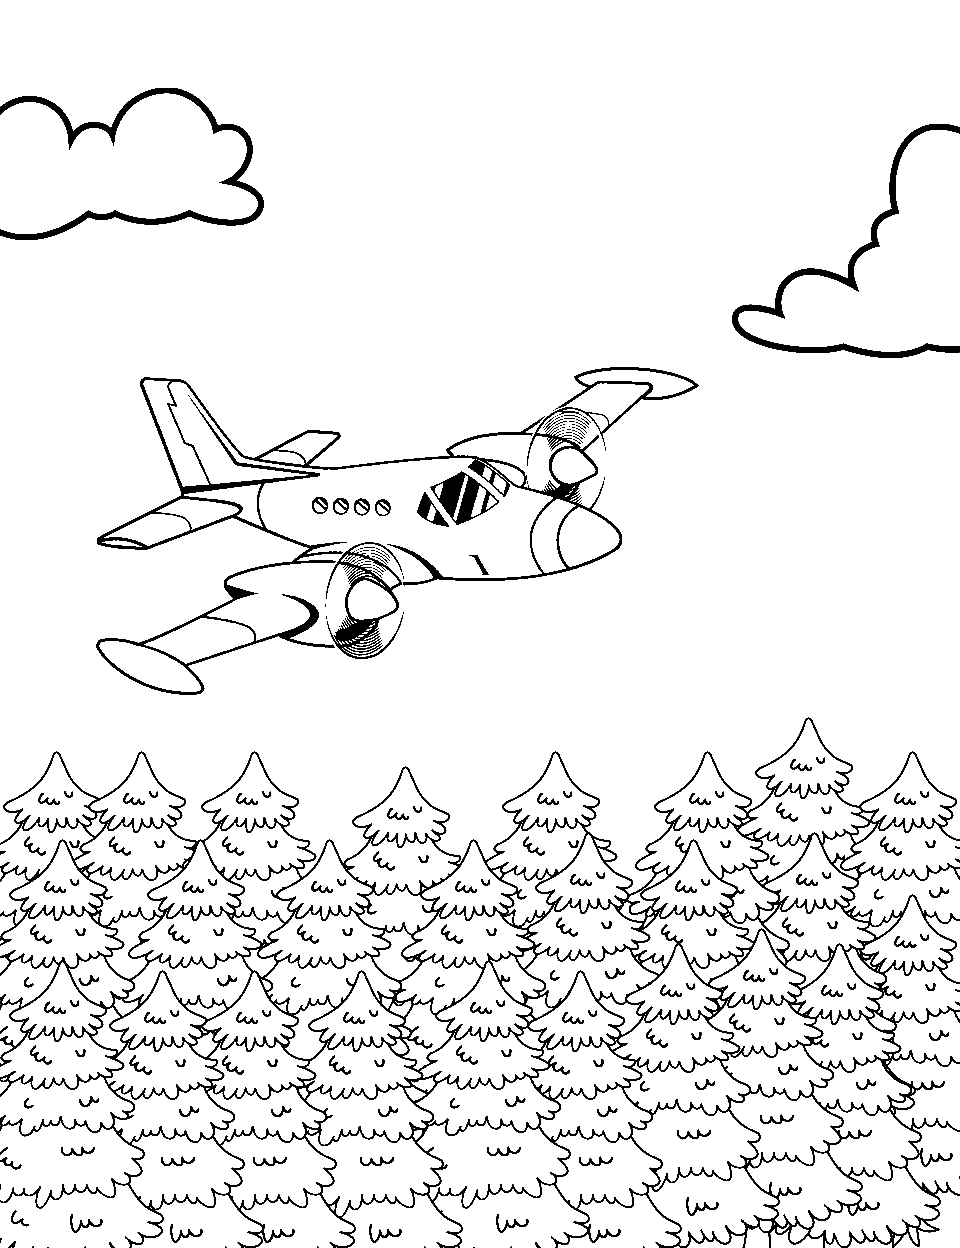 Aerial inspection Airplane Coloring Page - A plane checking out the forest condition from the sky above.